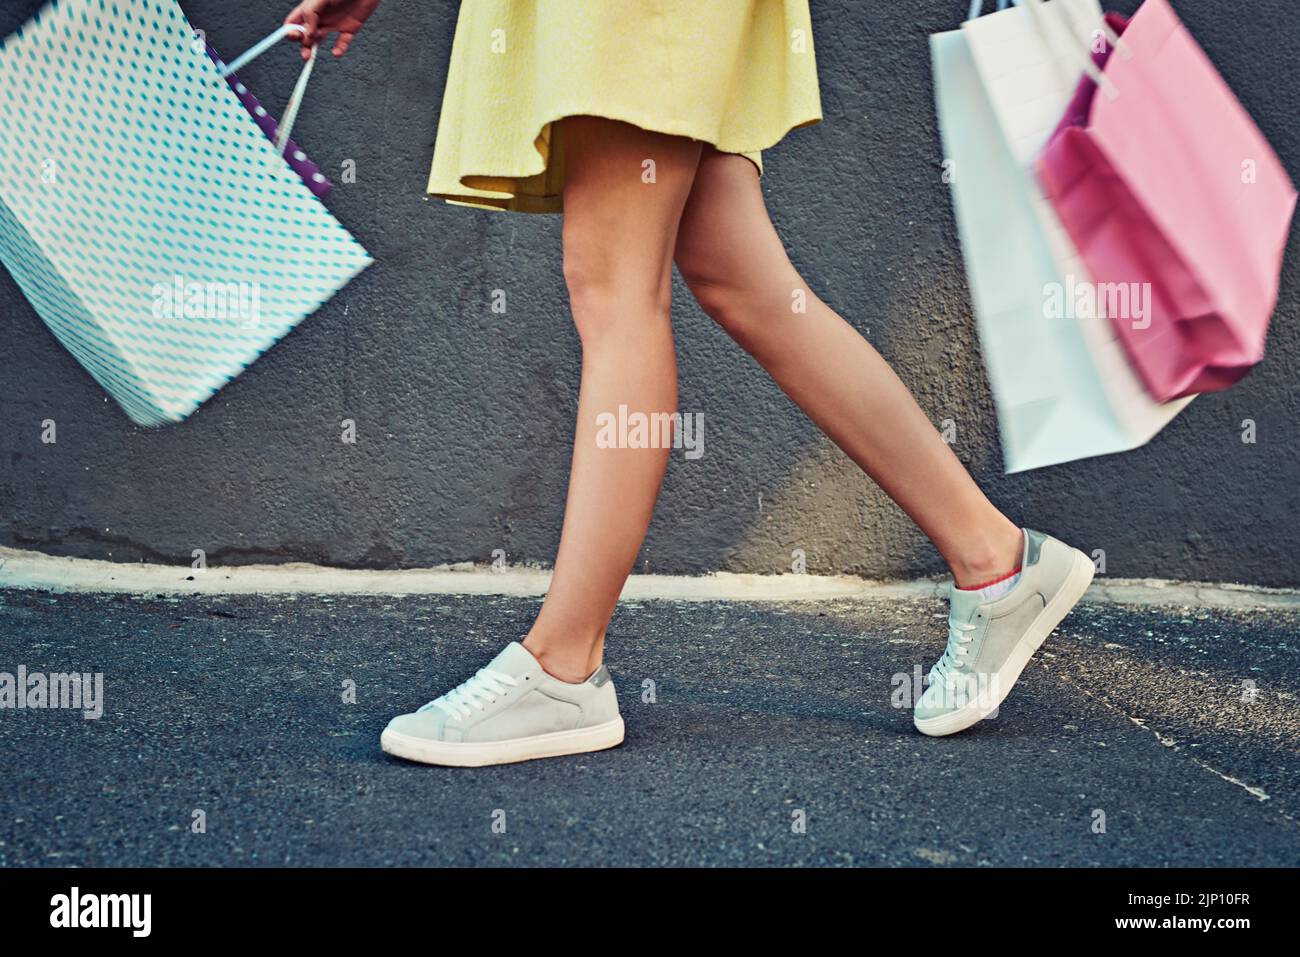 Shopping but no ways Im dropping. an unrecognizable woman on a shopping spree in the city. Stock Photo